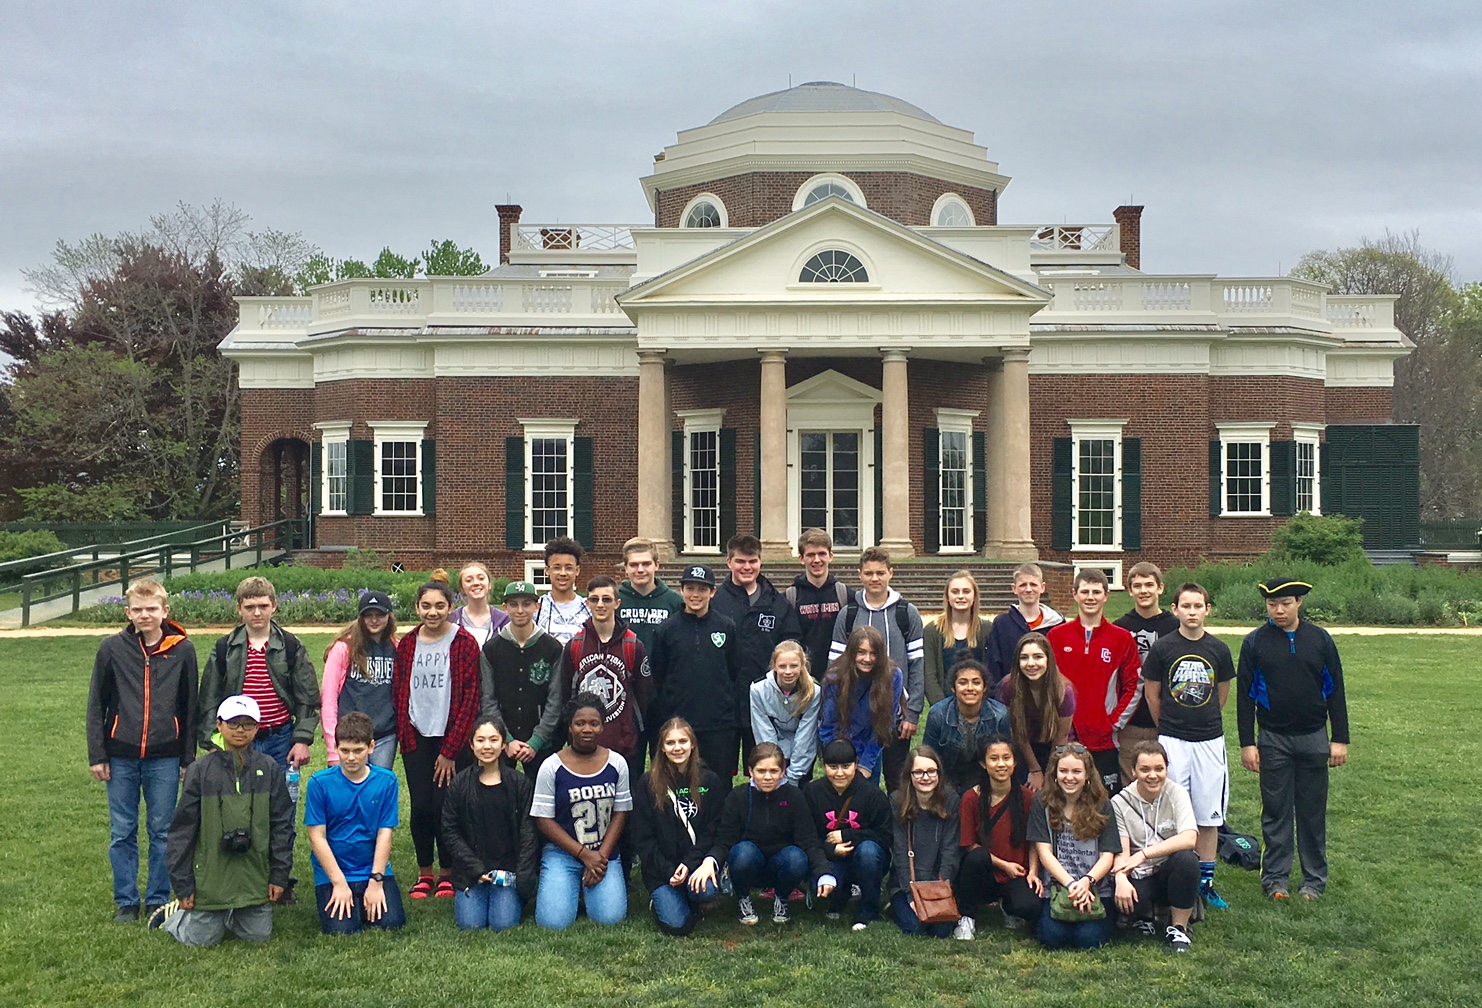 Group of middle school students posing in front of historical American building